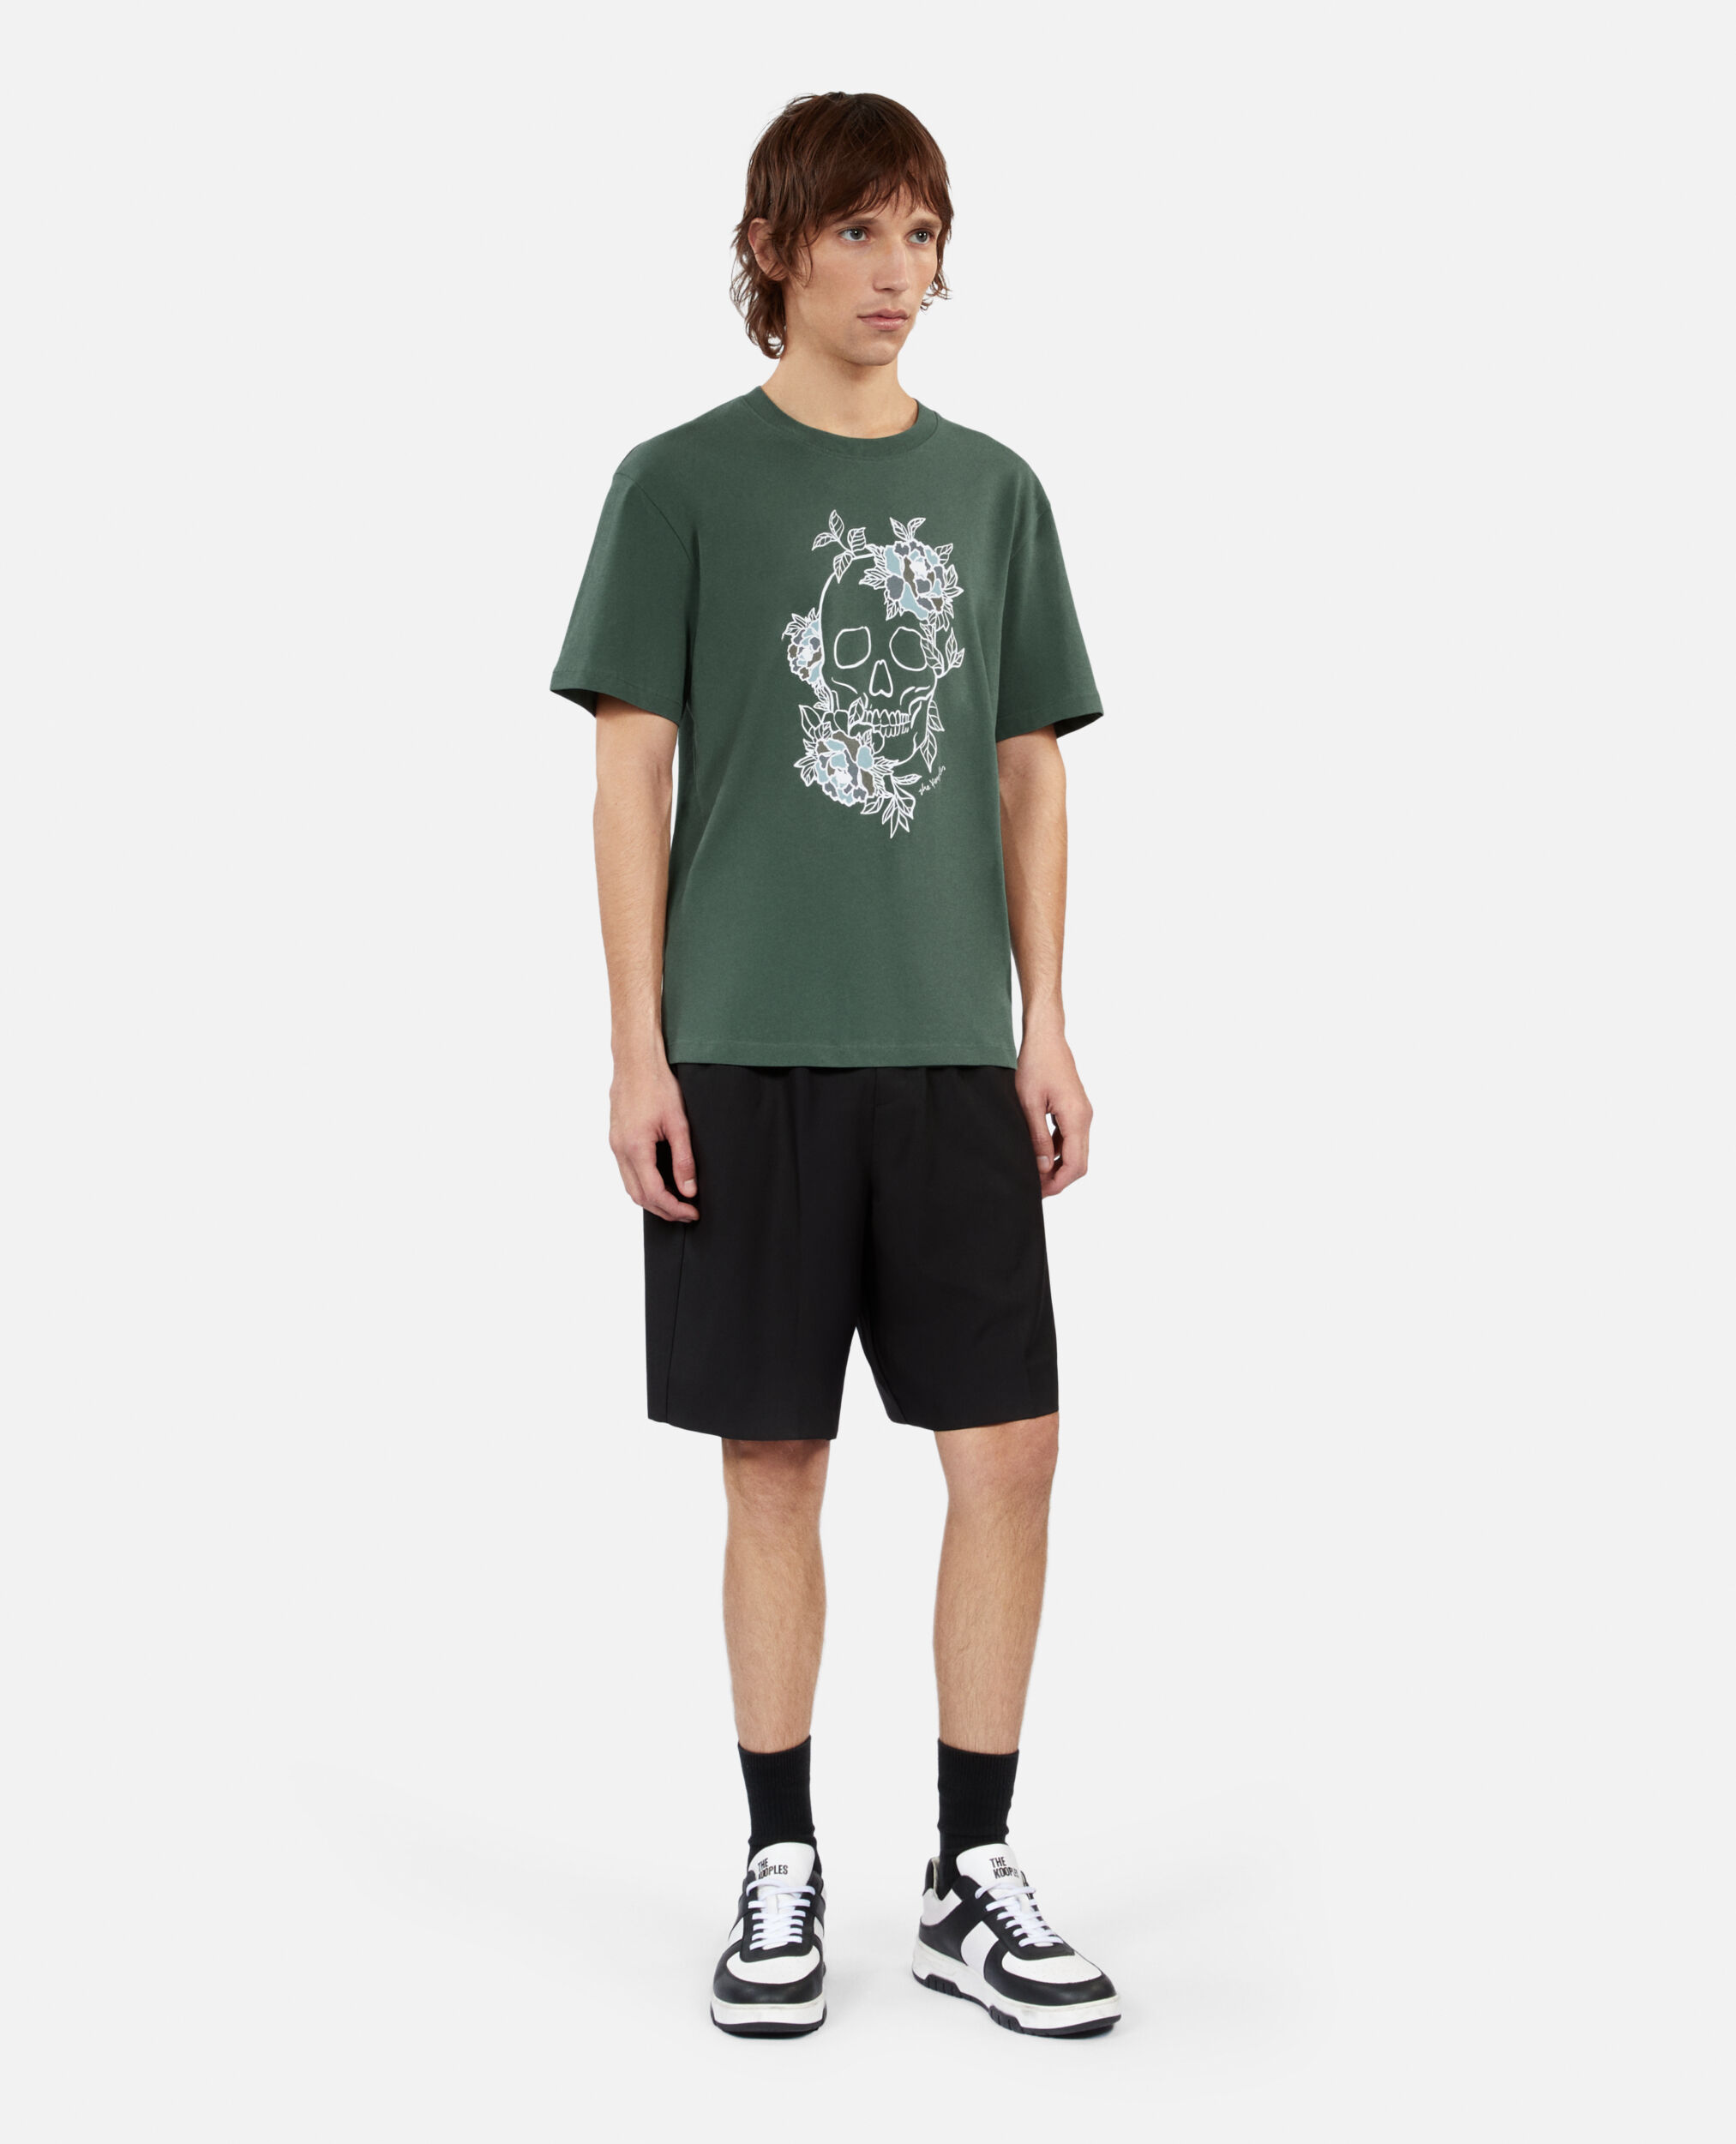 Men's green t-shirt with Flower skull serigraphy, FOREST, hi-res image number null